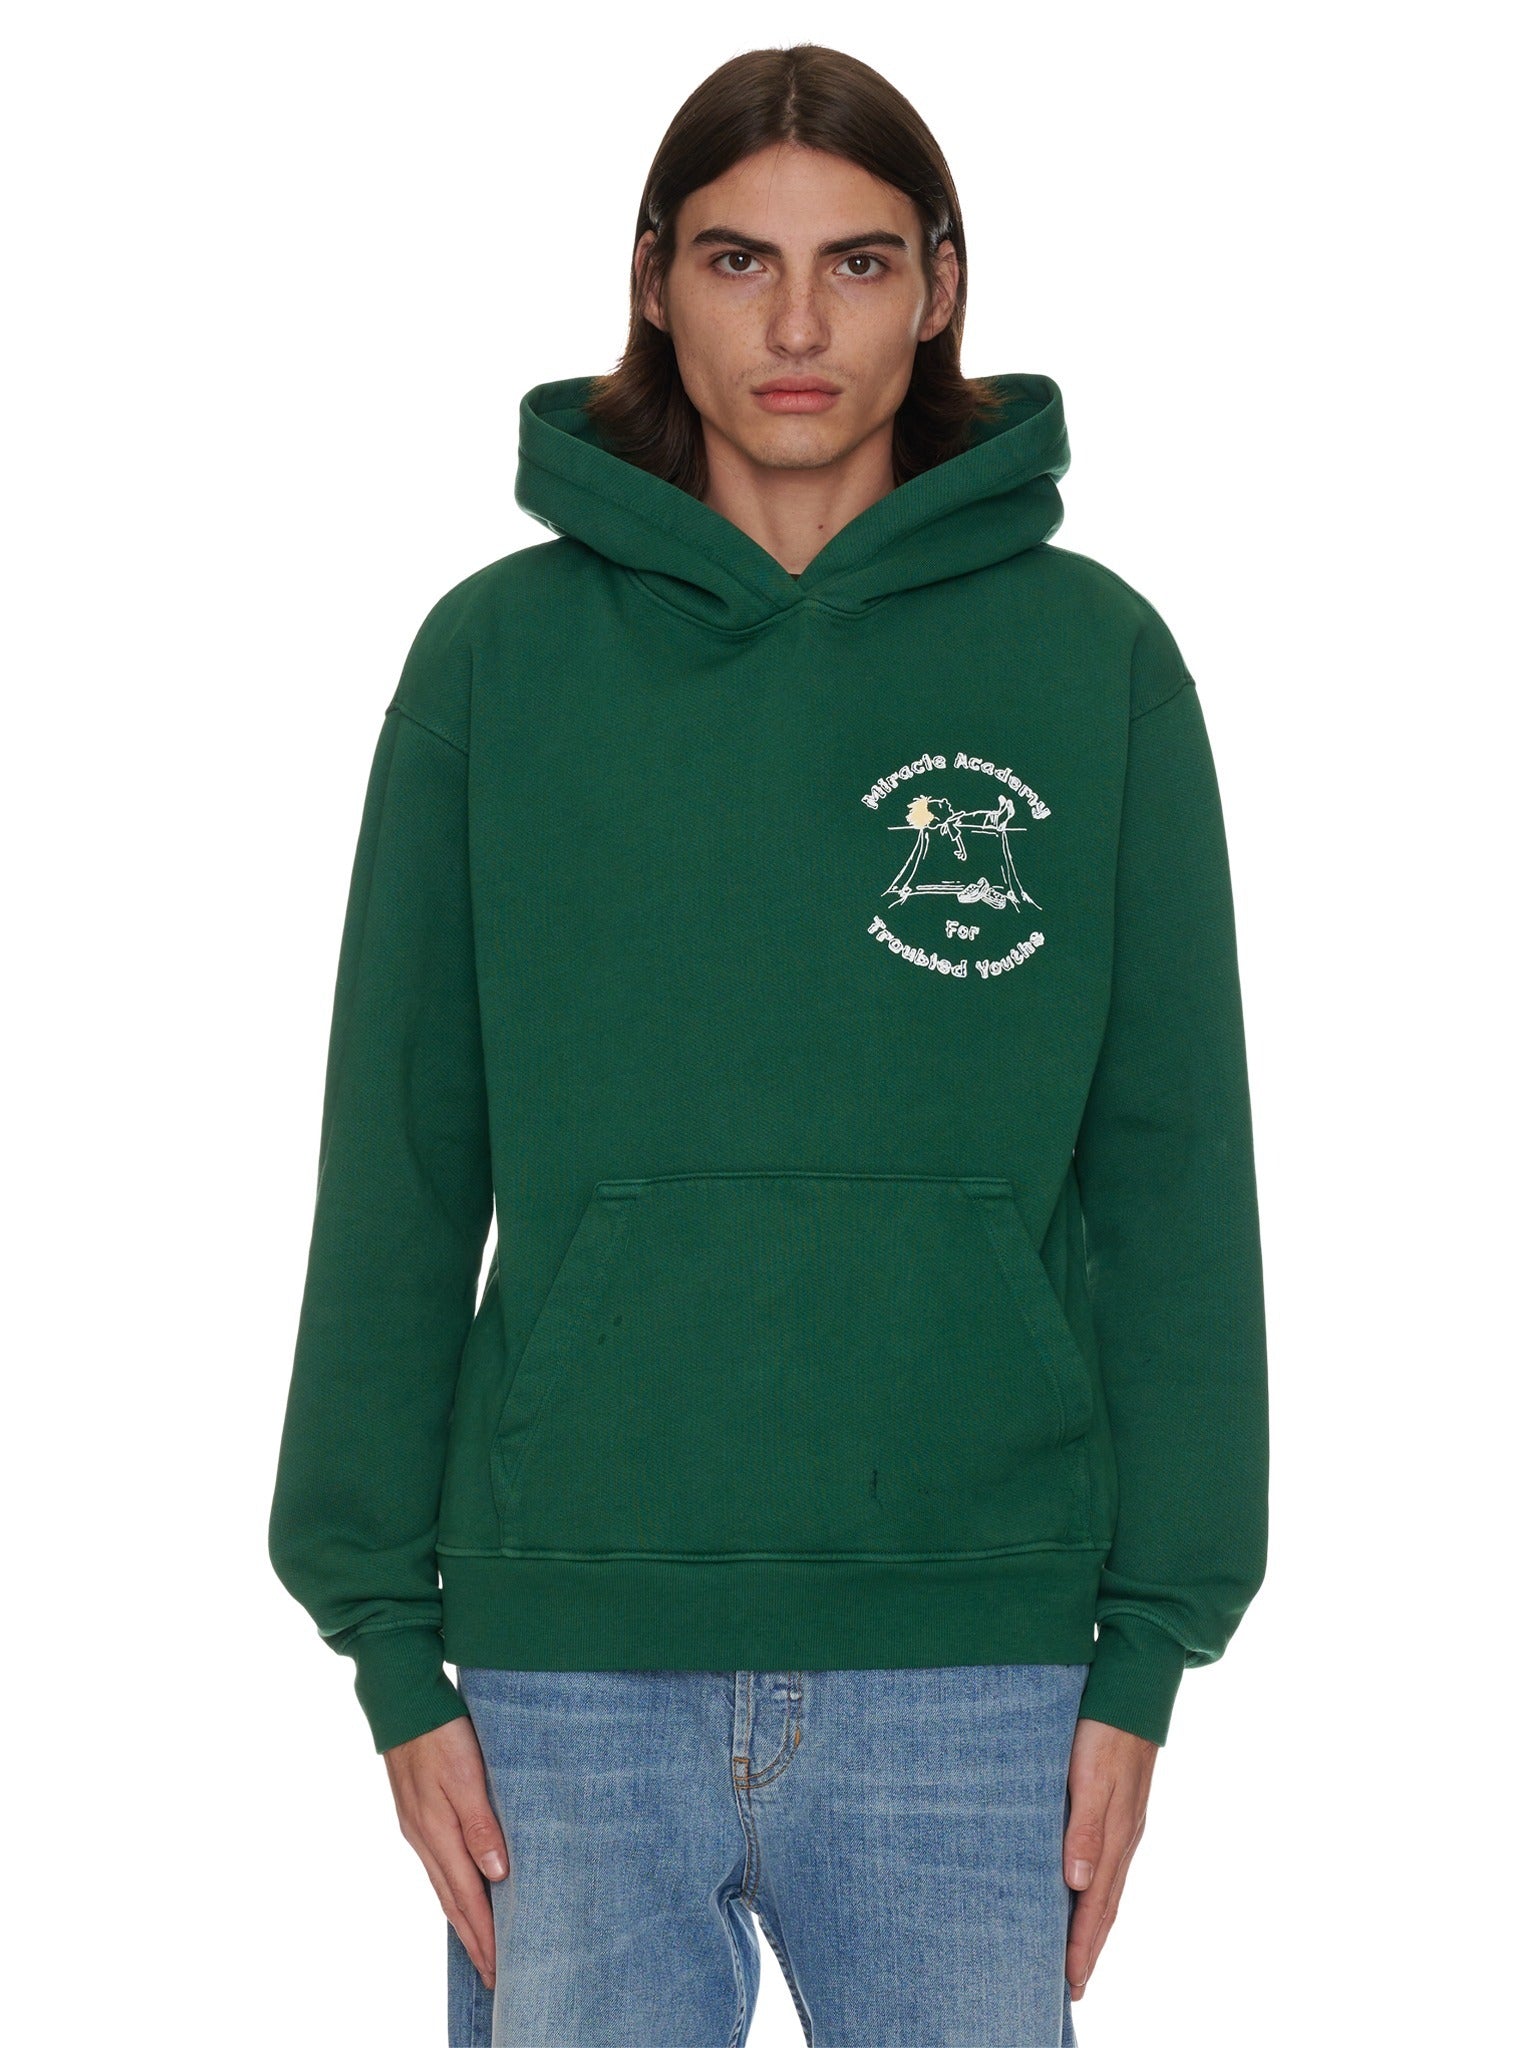 Troubled Youth Academy Hoodie